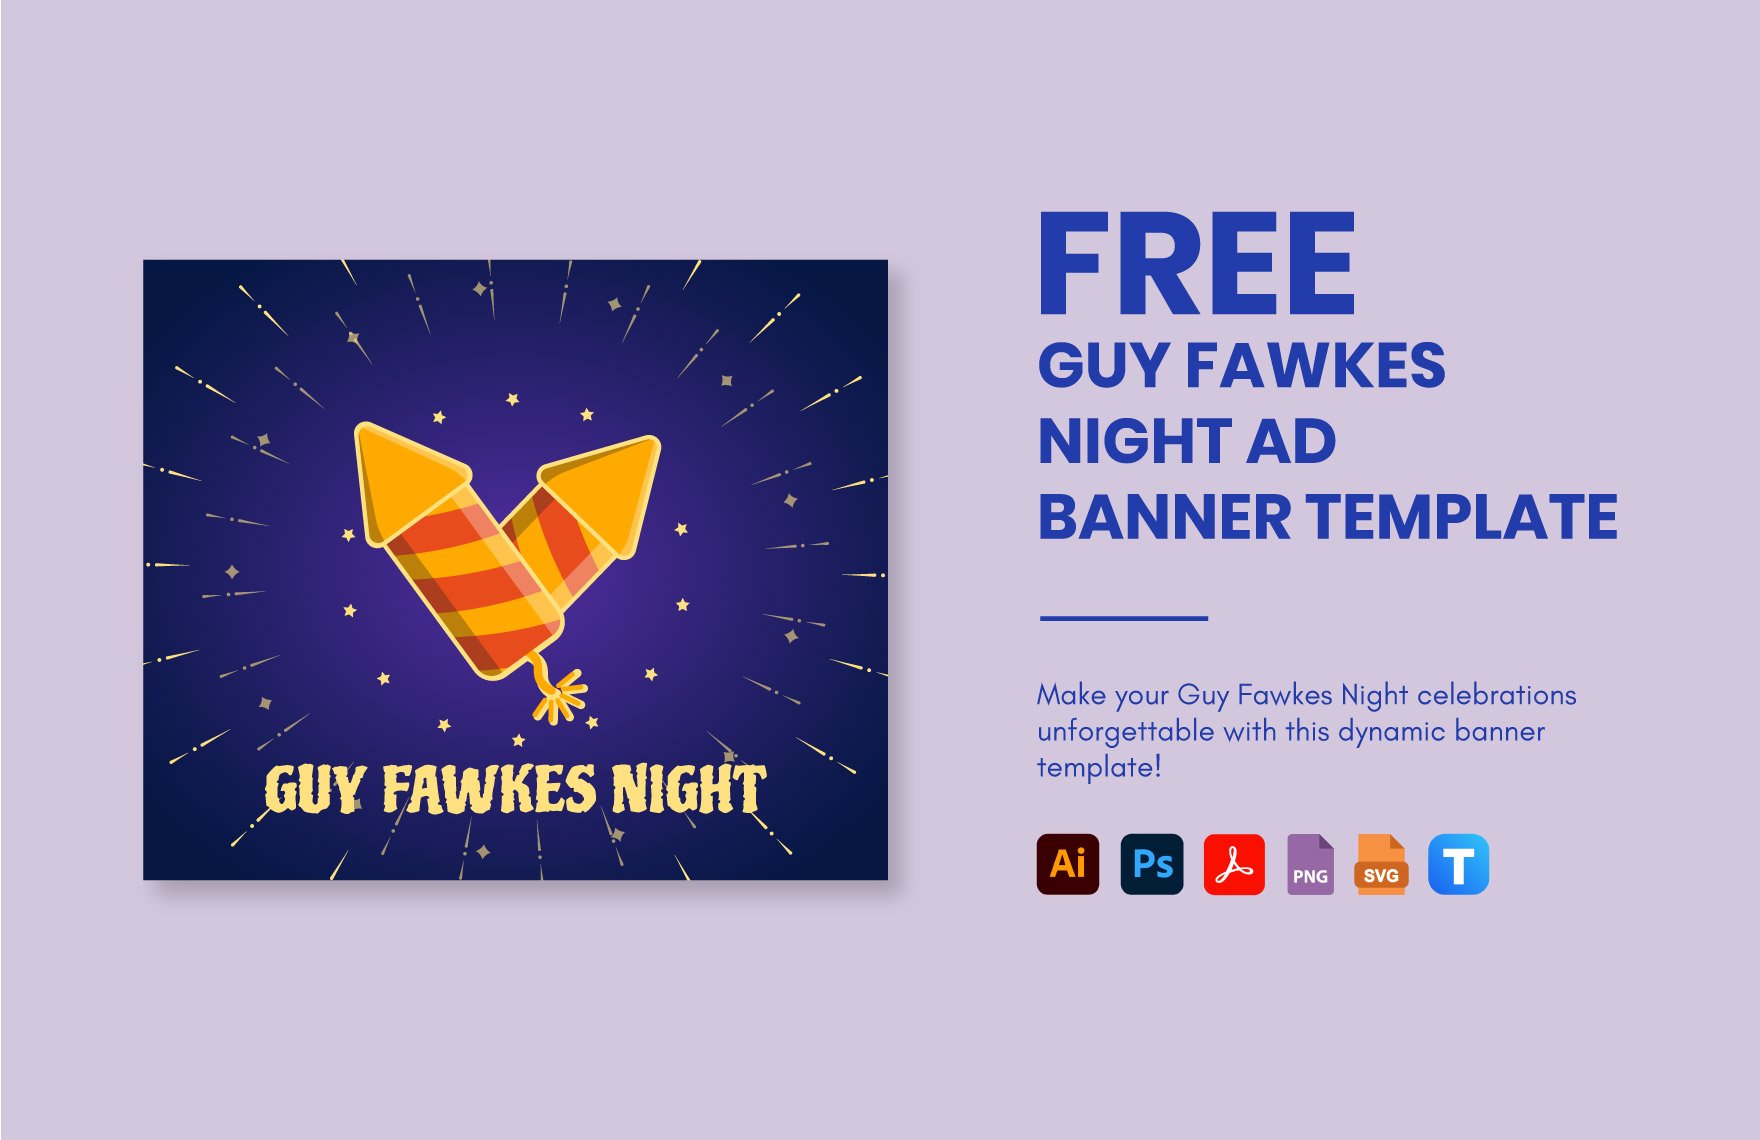 Free Guy Fawkes Night Ad Banner Template in PDF, Illustrator, PSD, SVG, PNG